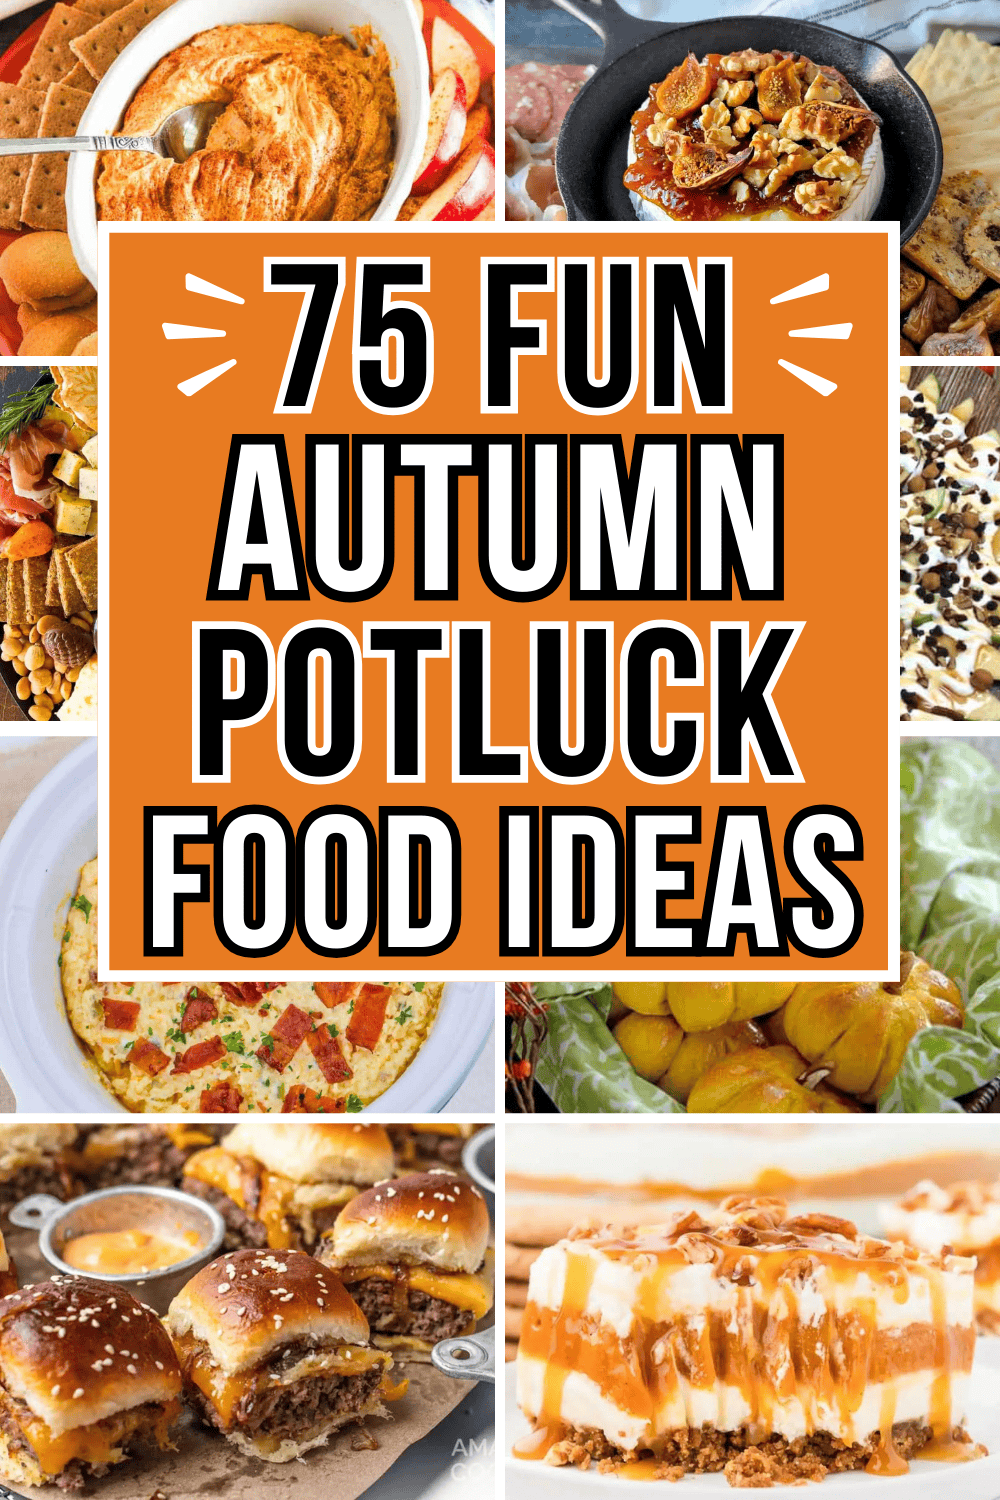 Easy fall potluck ideas! The best fall potluck appetizers, main dishes, desserts, and side dishes for a crowd. Fall foods for potluck, fall crockpot party food, food ideas for fall party, fall recipes potluck, side dish for fall potluck, fall crockpot potluck recipes, potluck desserts fall, fall potluck aesthetic, best fall potluck recipes, what to bring to a fall potluck, fall potluck ideas for work, potluck lunch ideas, church potluck recipes, Thanksgiving potluck dishes, fall finger foods.